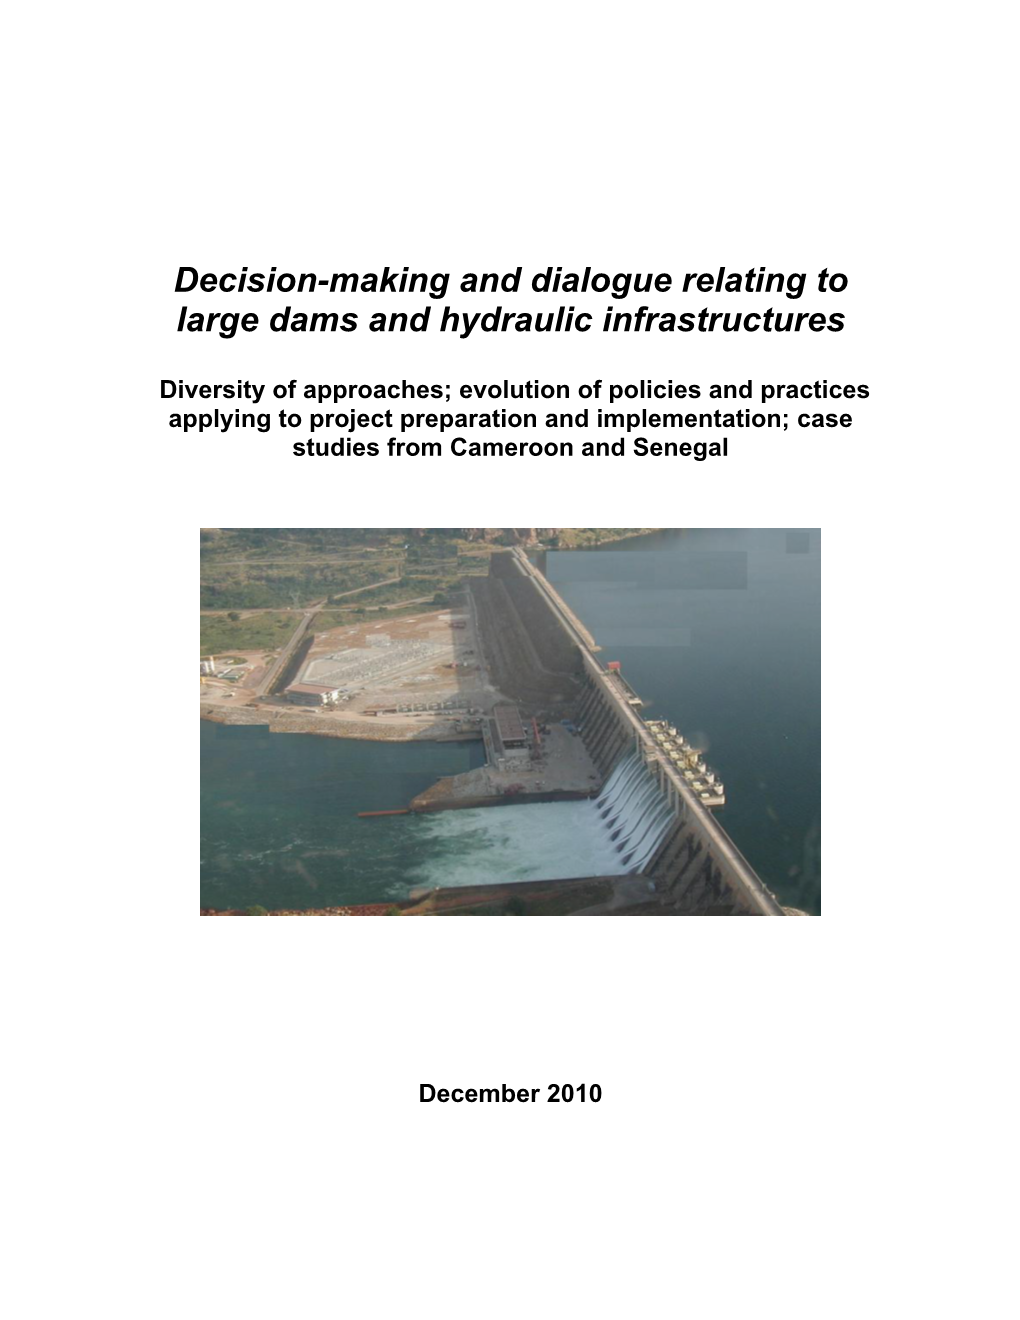 Decision-Making and Dialogue Relating to Large Dams and Hydraulic Infrastructures